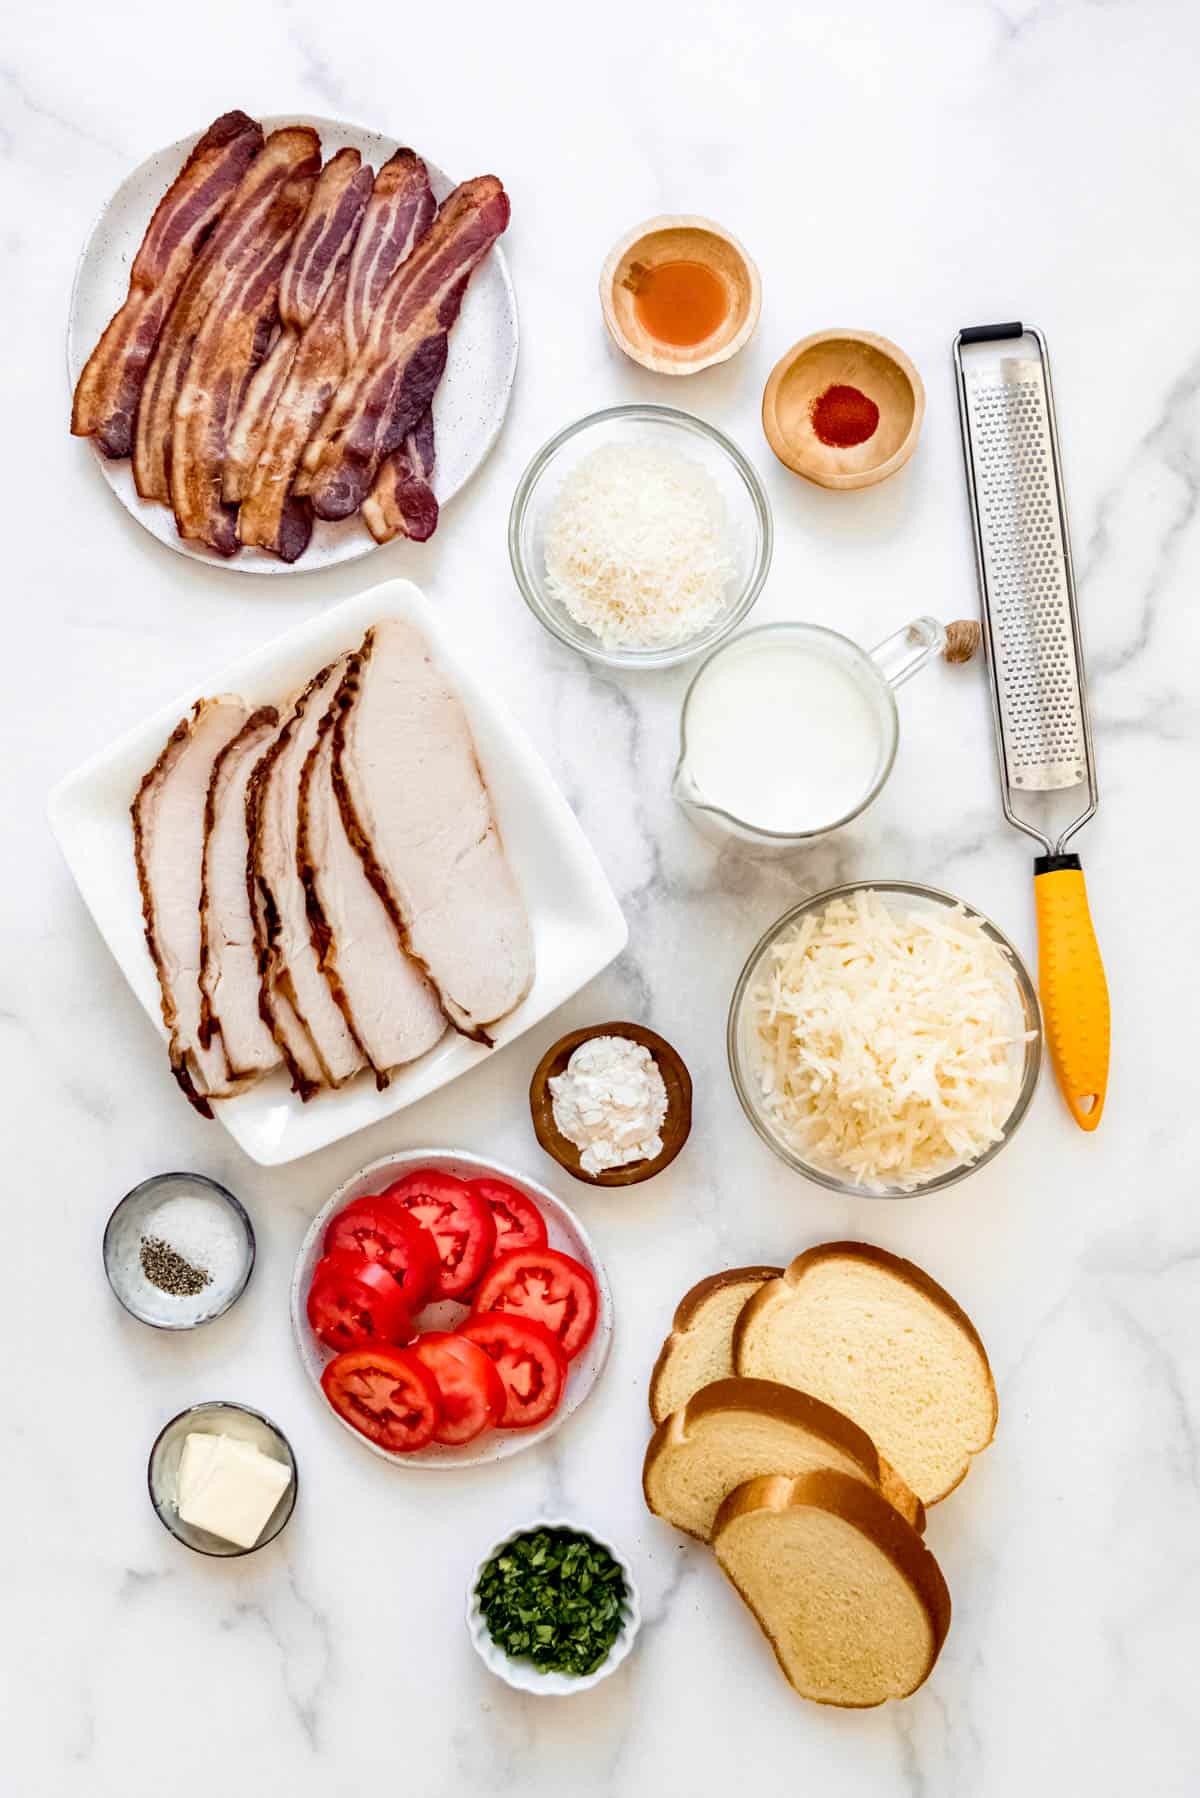 Overhead view of ingredients for Kentucky hot brown sandwiches.